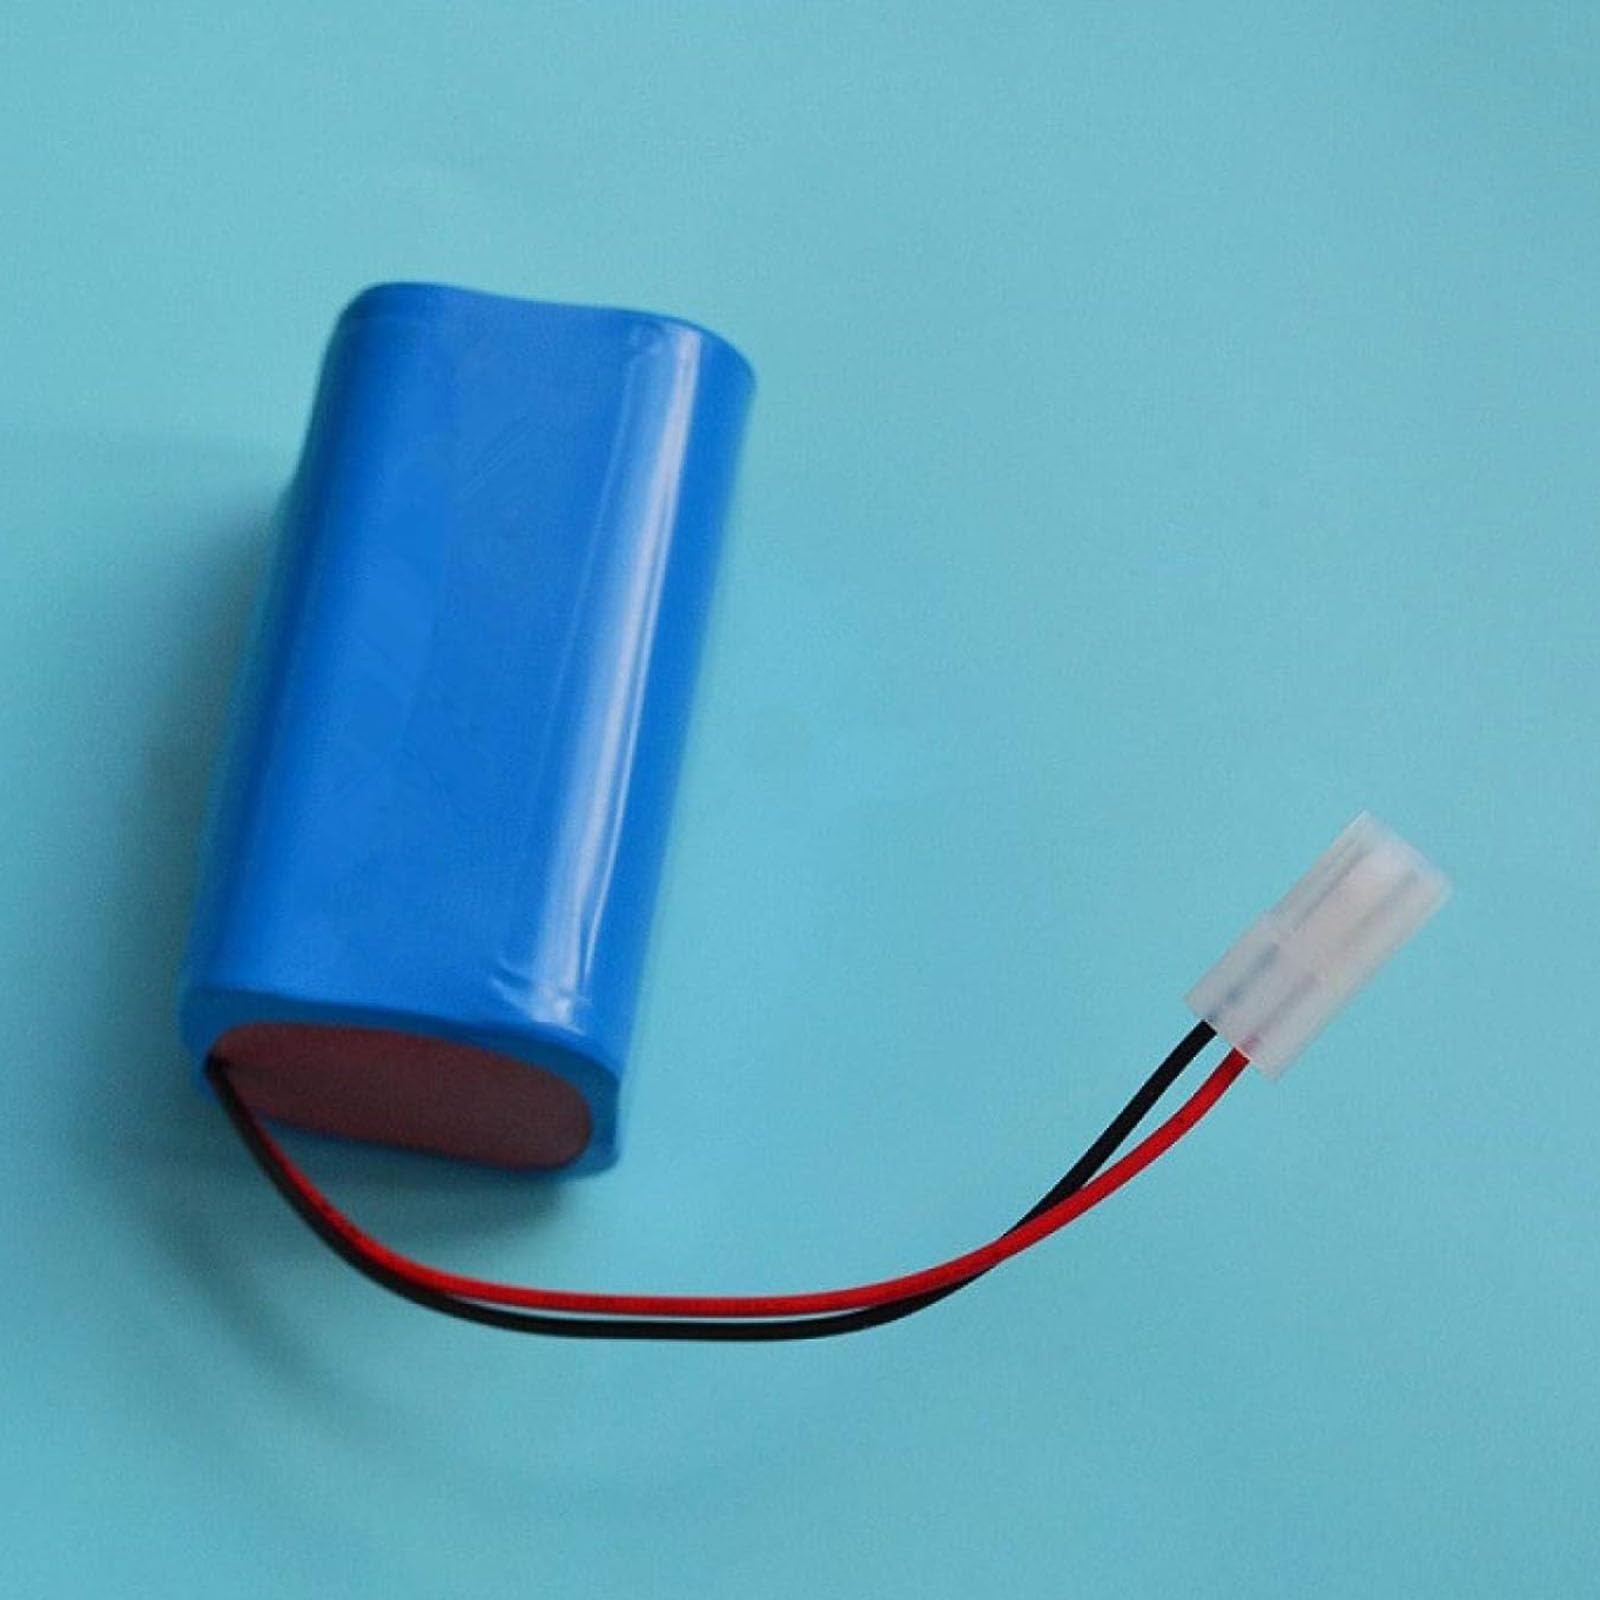 CSTAL 7.4V 4.4Ah 2S2P Lithium Ion Battery Pack, Comes with PCB Wires and SM-2P Connector